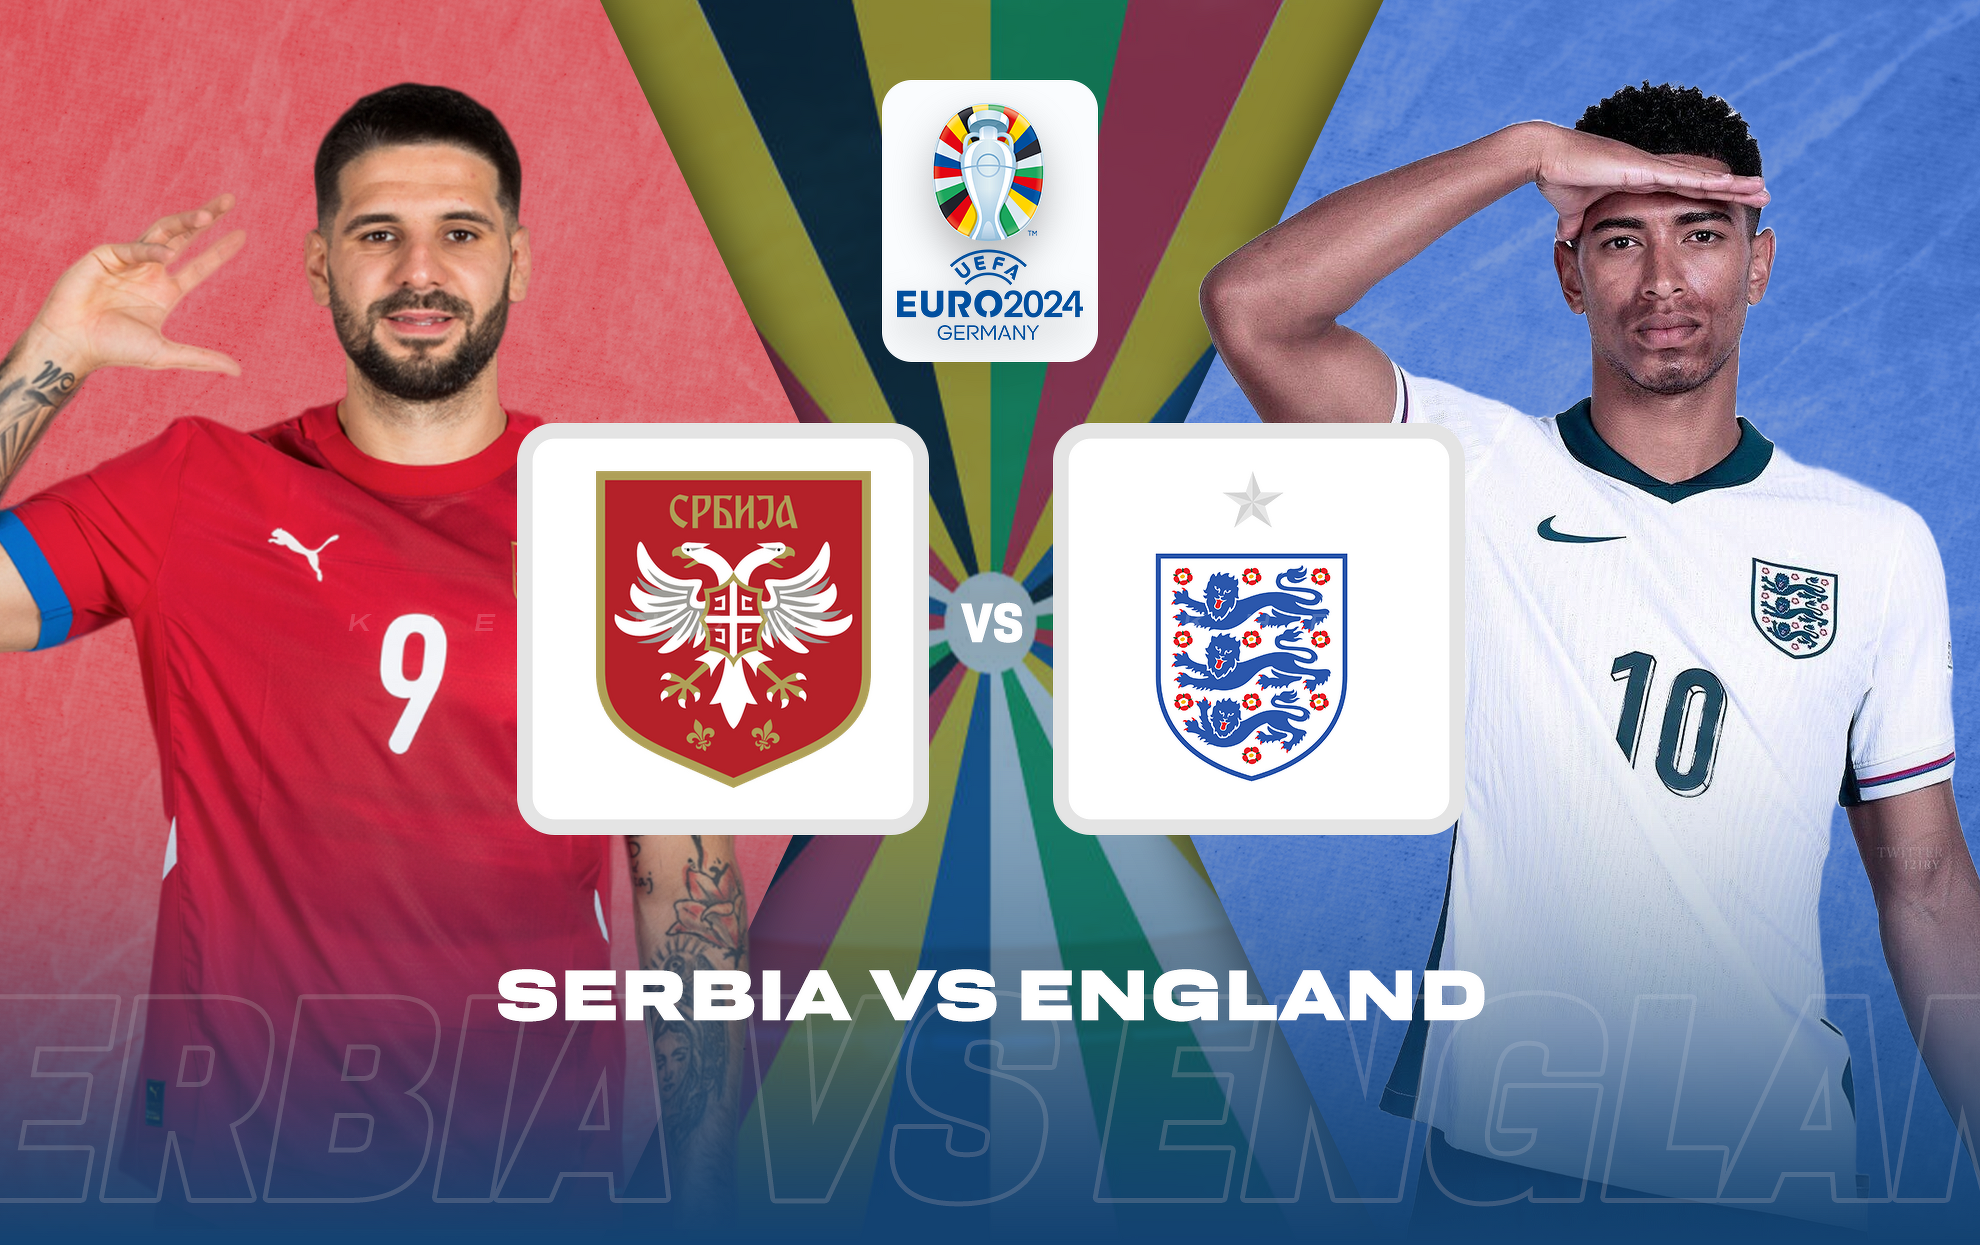 Serbia vs England Live streaming, TV channel, kickoff time & where to